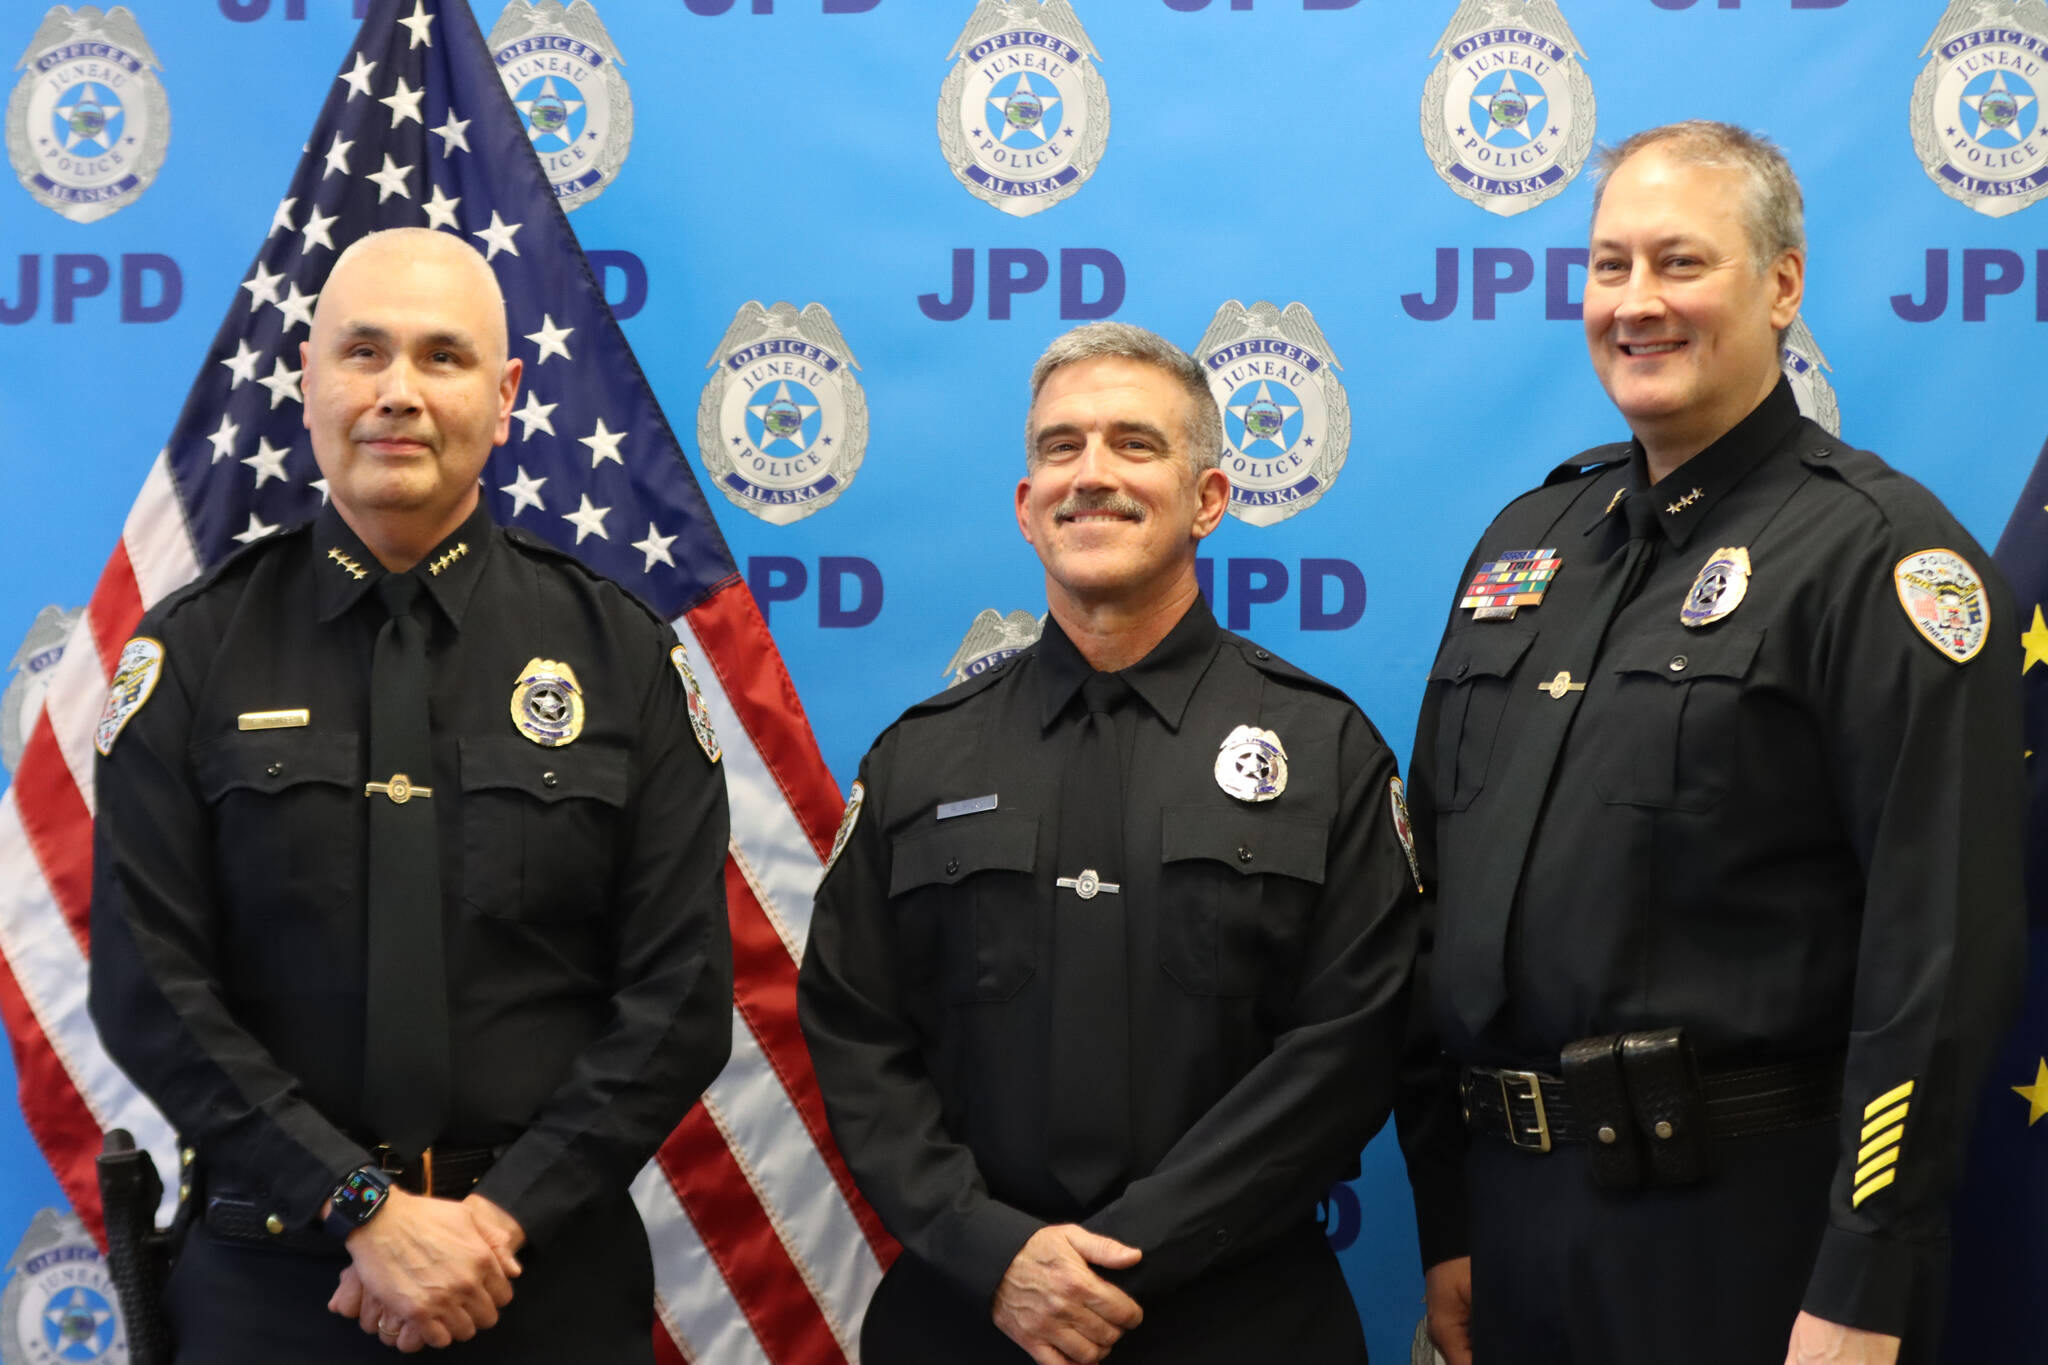 Officer William Hicks stands with JPD Chief Ed Mercer and Deputy Chief David Campbell during a swearing in ceremony for Hicks on Thursday at the JPD station in Lemon Creek. (Jonson Kuhn / Juneau Empire)